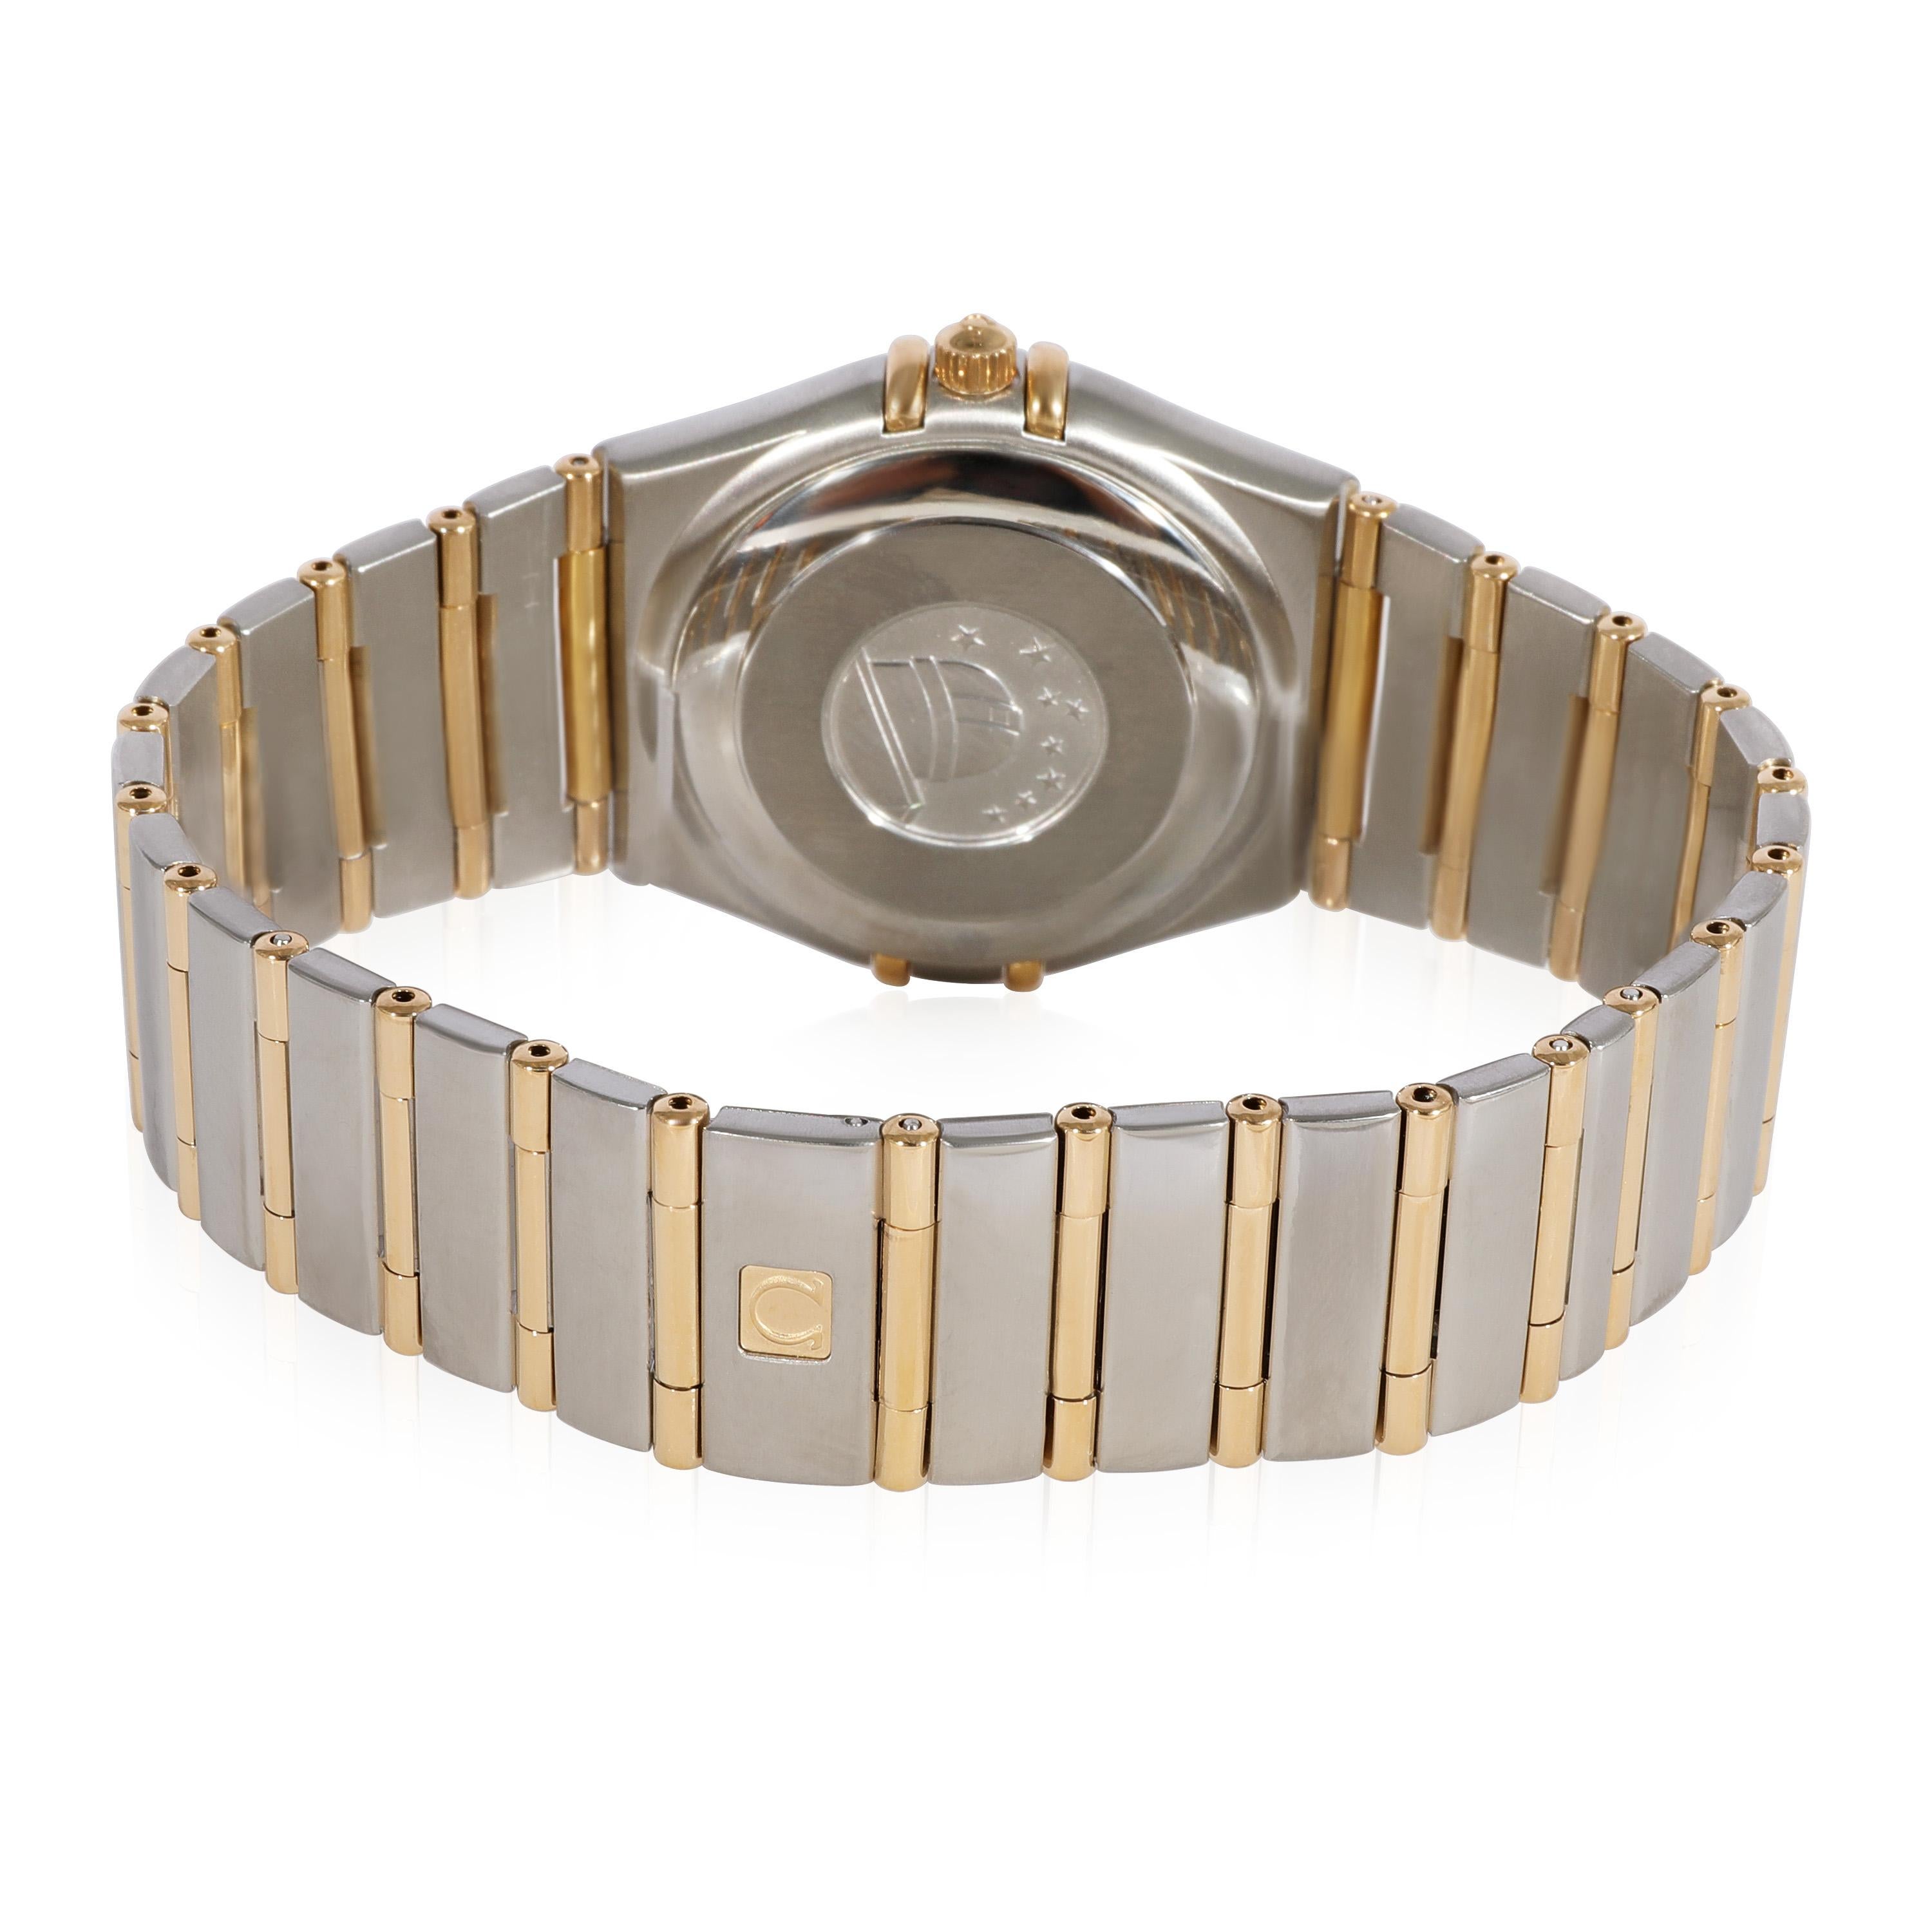 Omega Constellation 1202.10.00 Men's Watch in  Stainless Steel/Yellow Gold

SKU: 118839

PRIMARY DETAILS
Brand: Omega
Model: Constellation
Country of Origin: Switzerland
Movement Type: Mechanical: Hand-winding
Year Manufactured: 1999
Year of